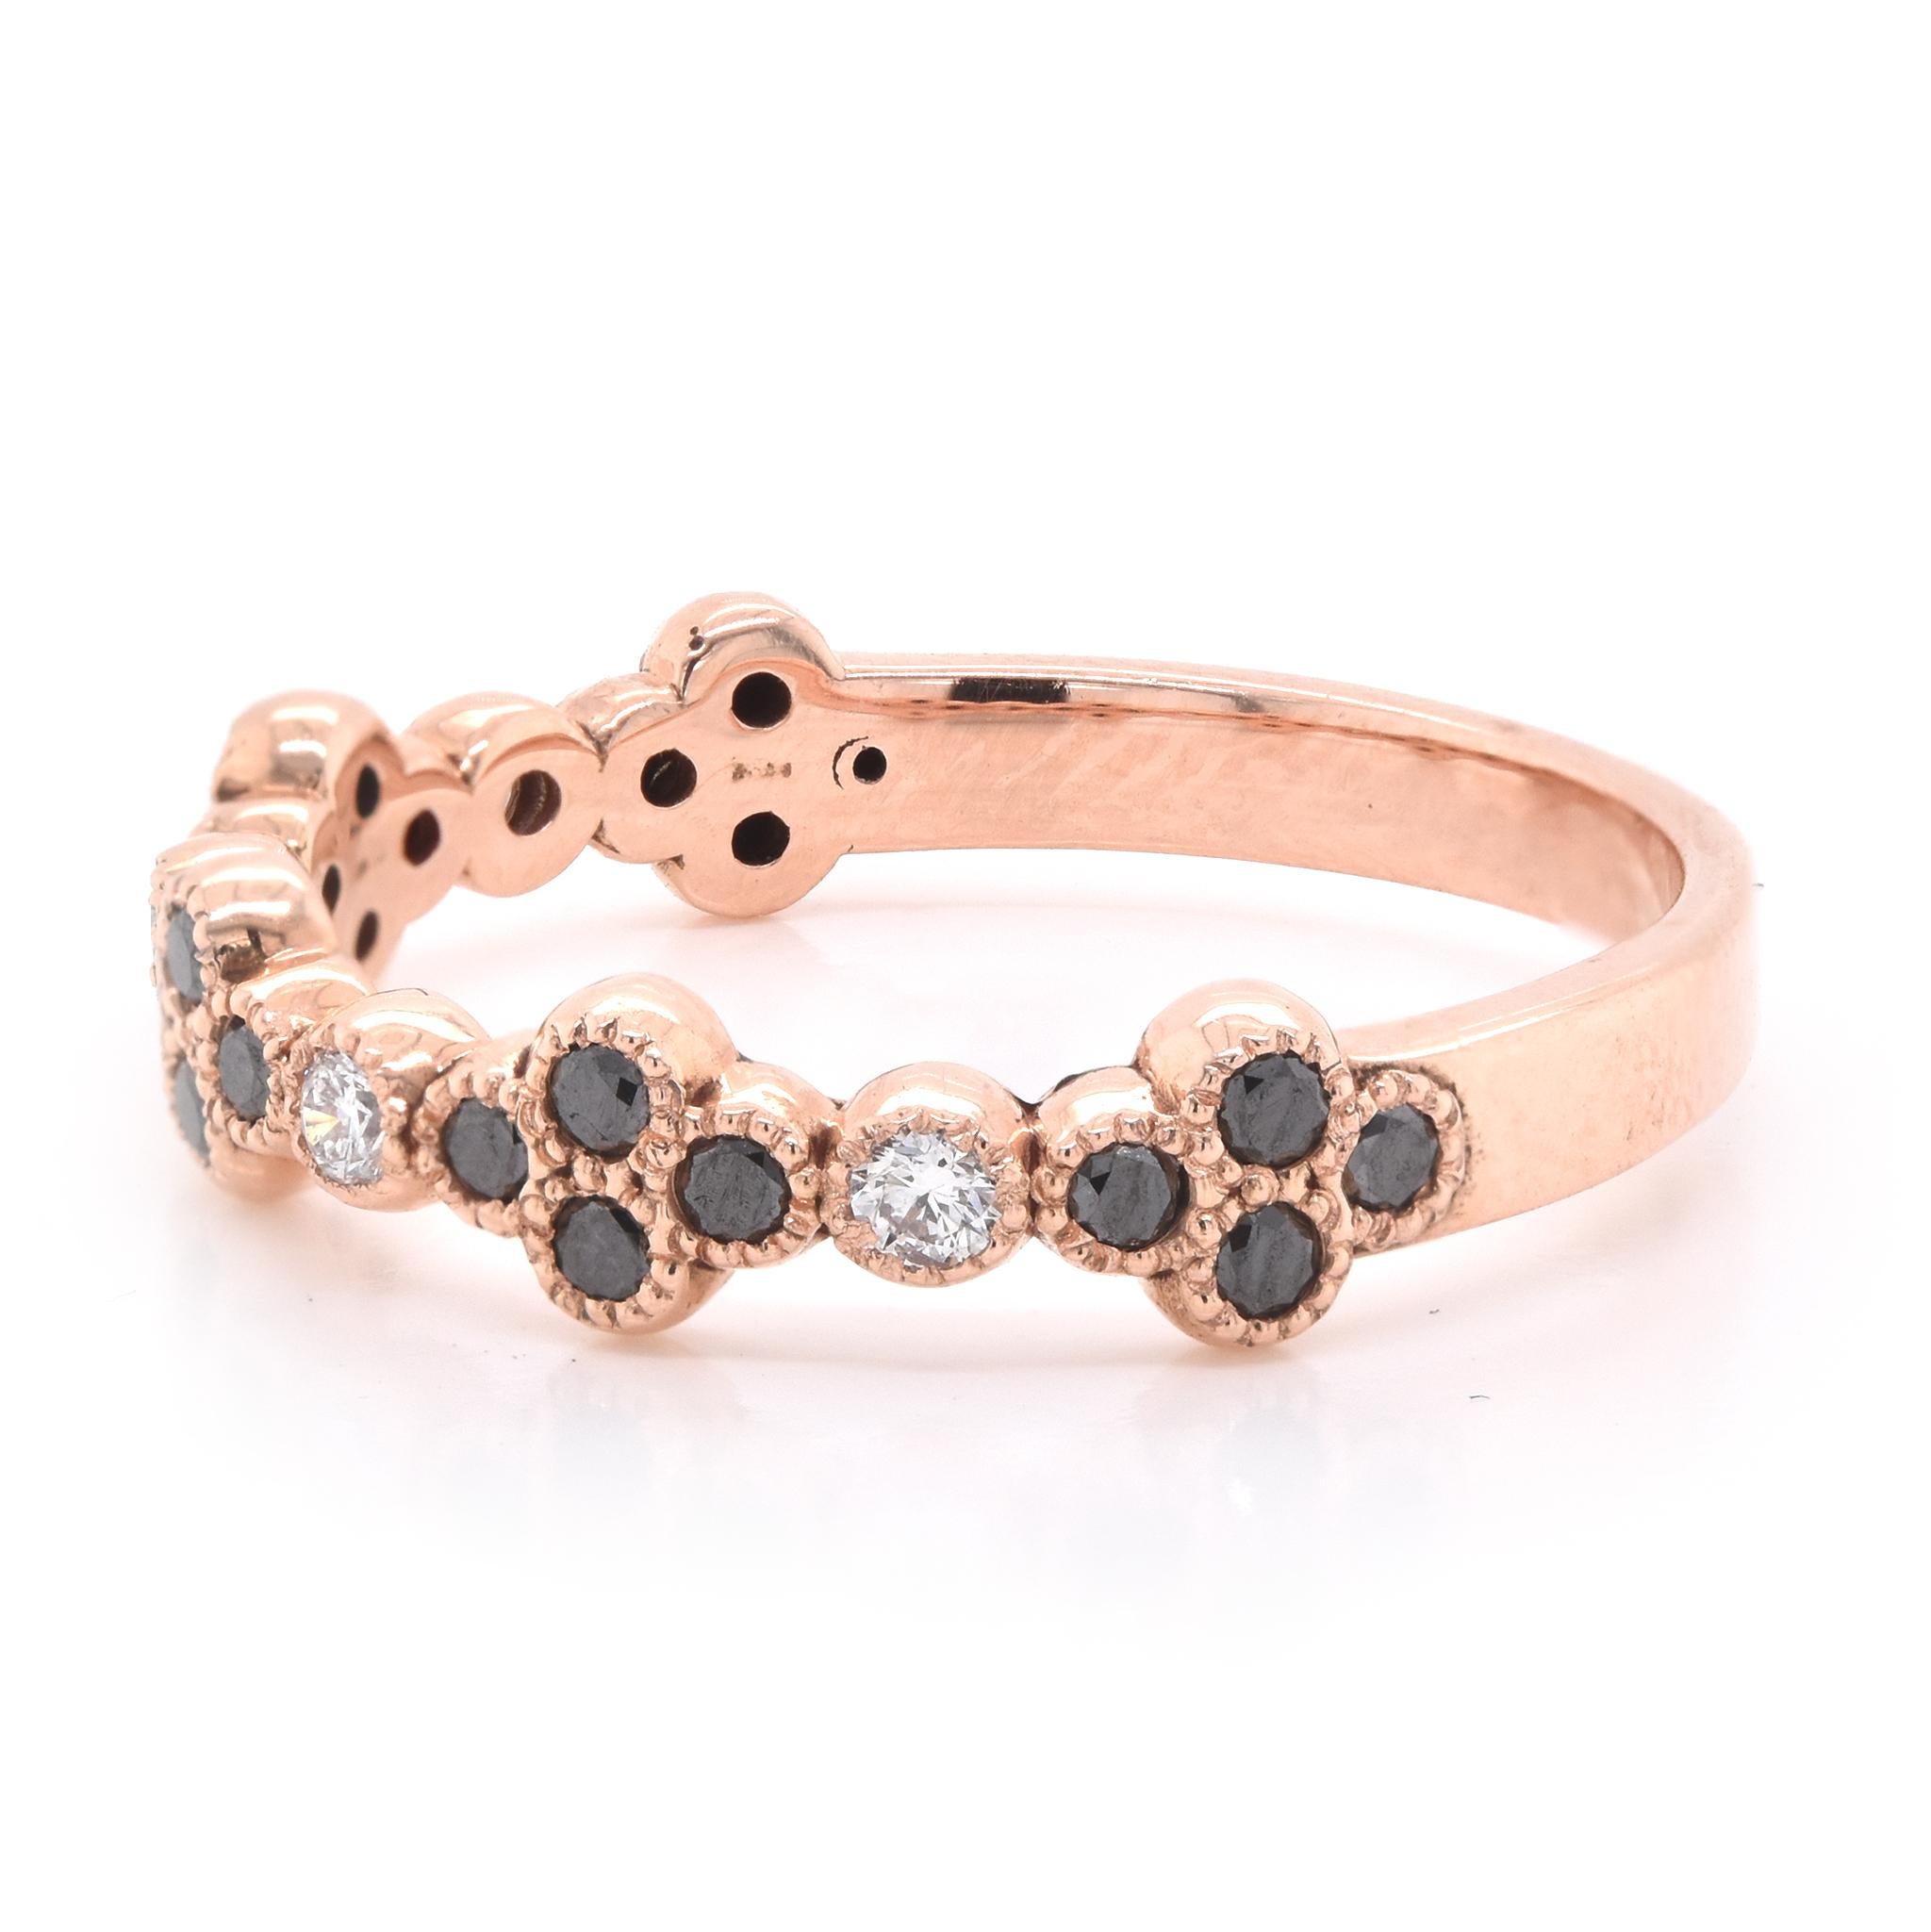 Material: 14k rose gold
White Diamonds: round brilliant cuts = 0.10cttw
Black Diamonds: round brilliant cuts = 0.27cttw 
Size: 6 ¾ 
Dimensions: ring measures 2.45mm in width
Weight: 2.38 grams
